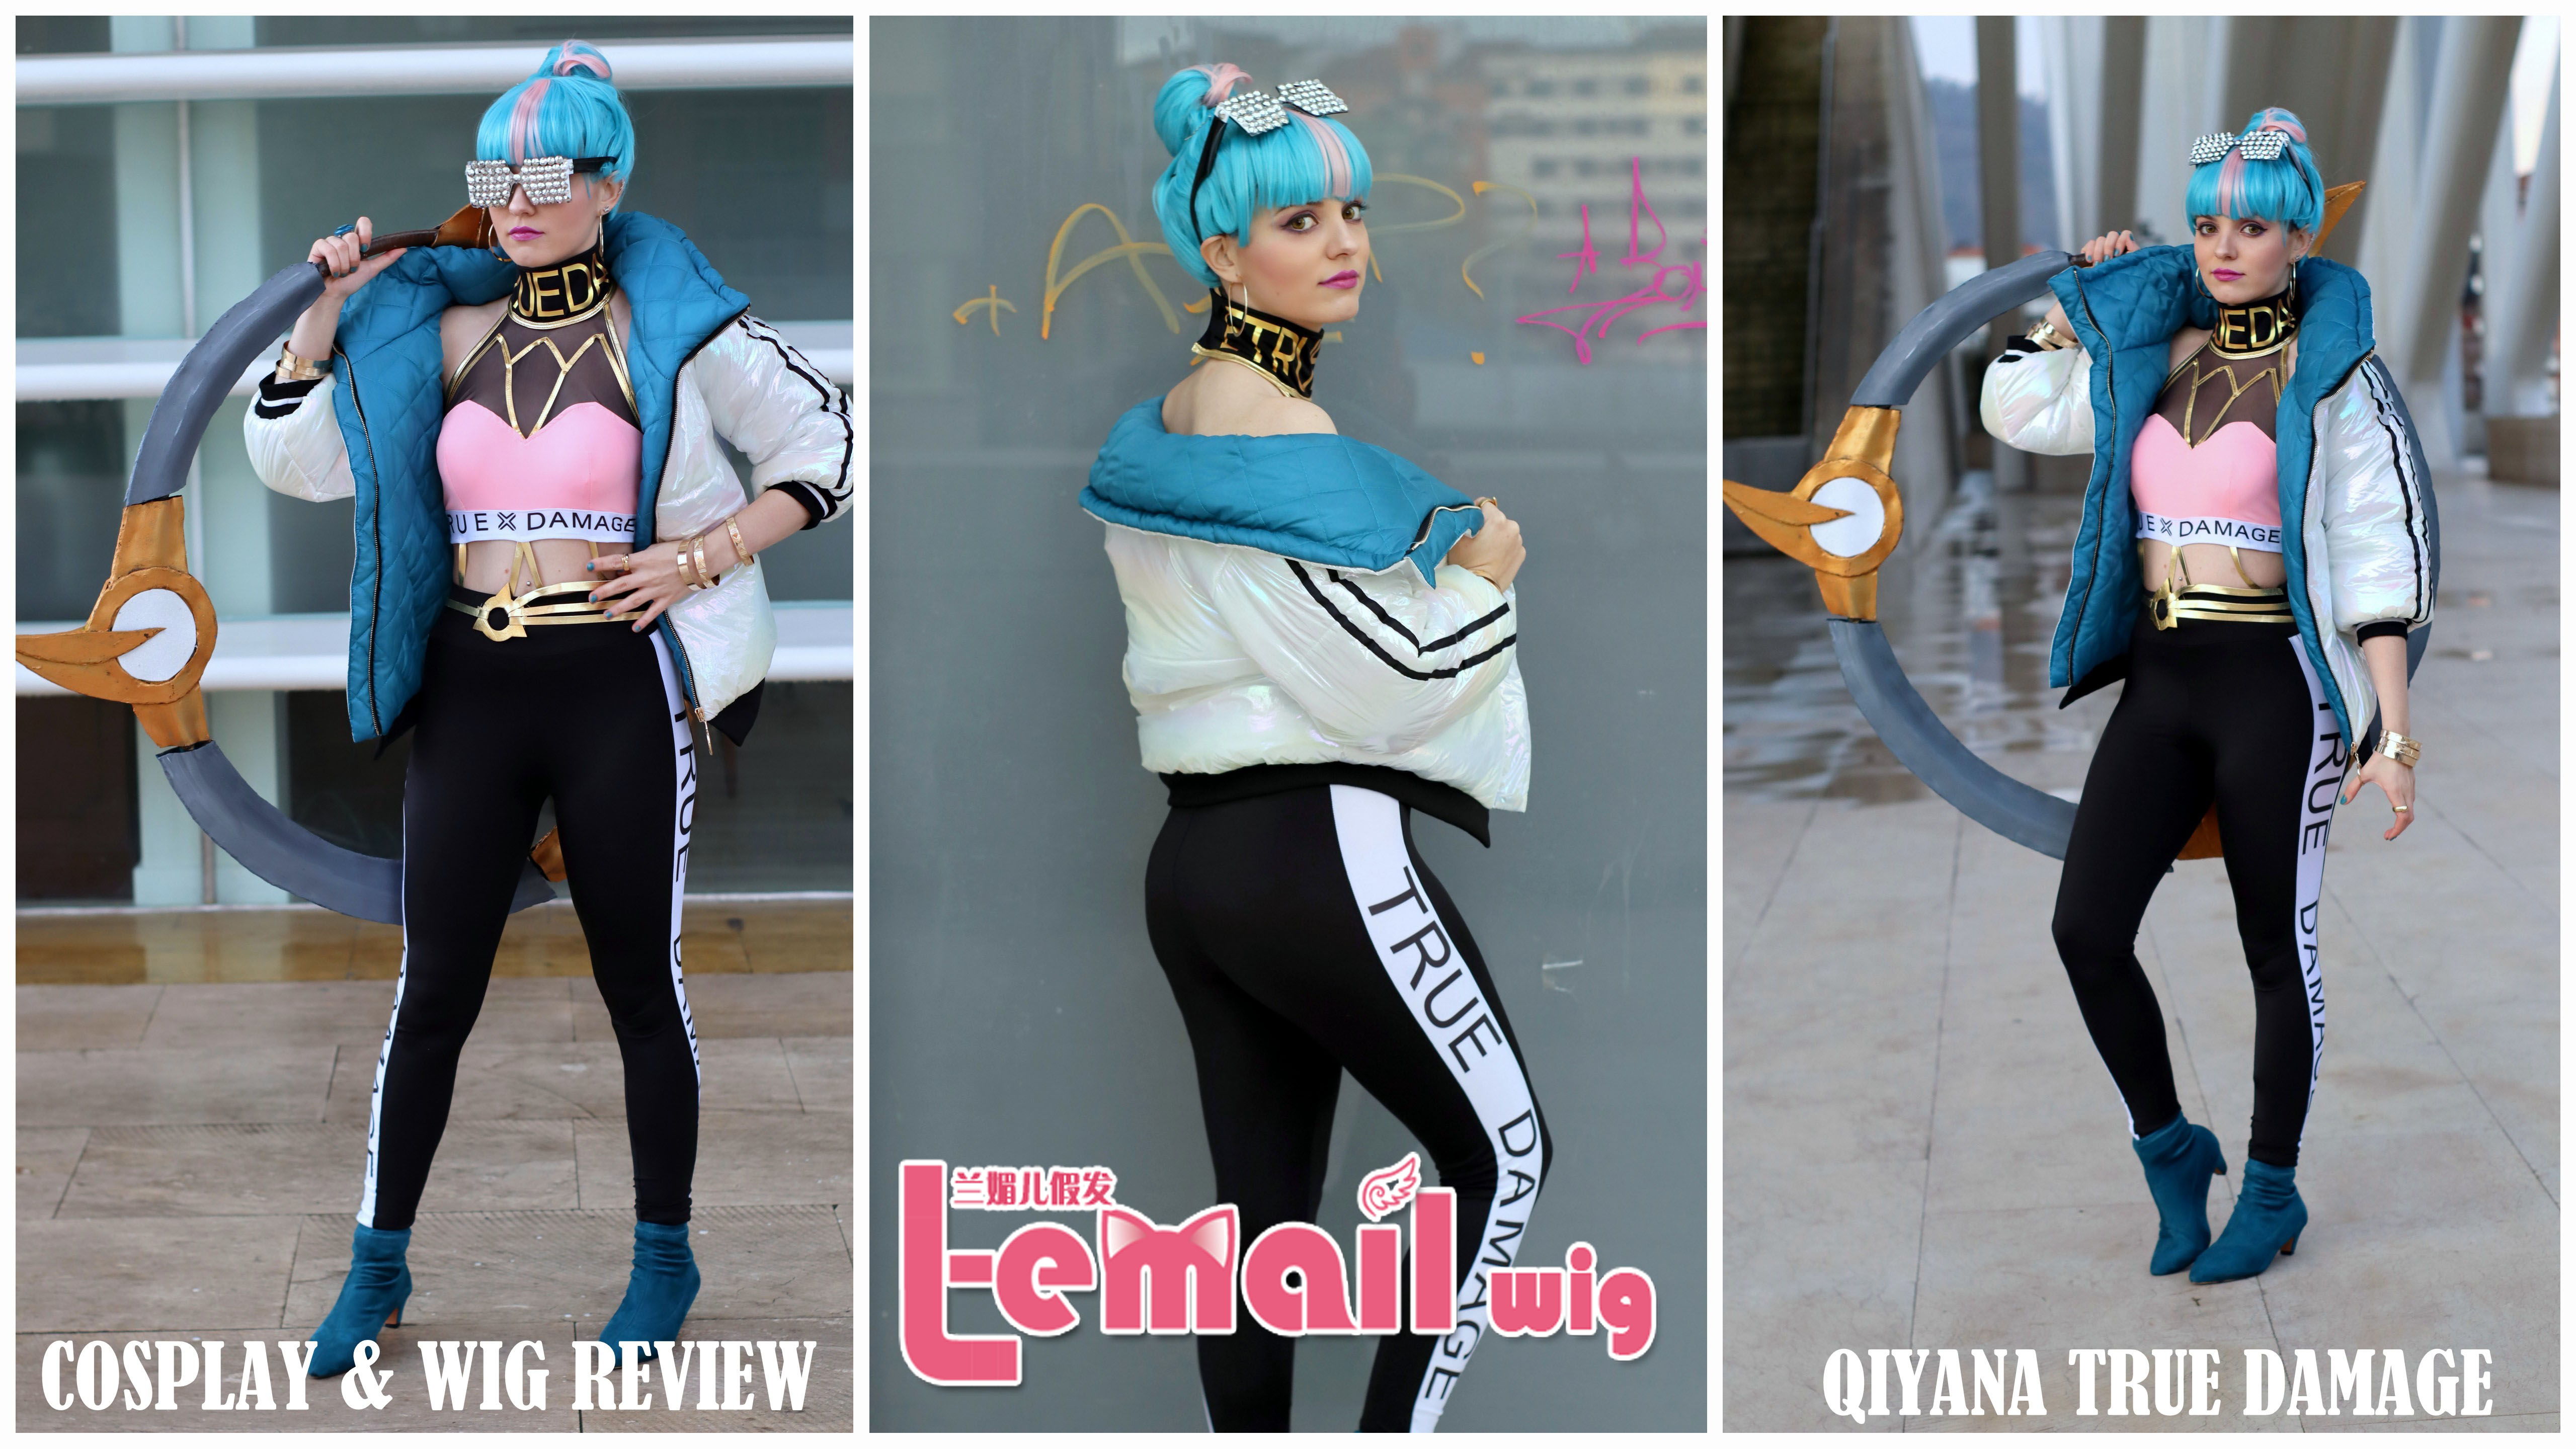 Cosplay & Wig review: Qiyana True Damage from L-email Wigs